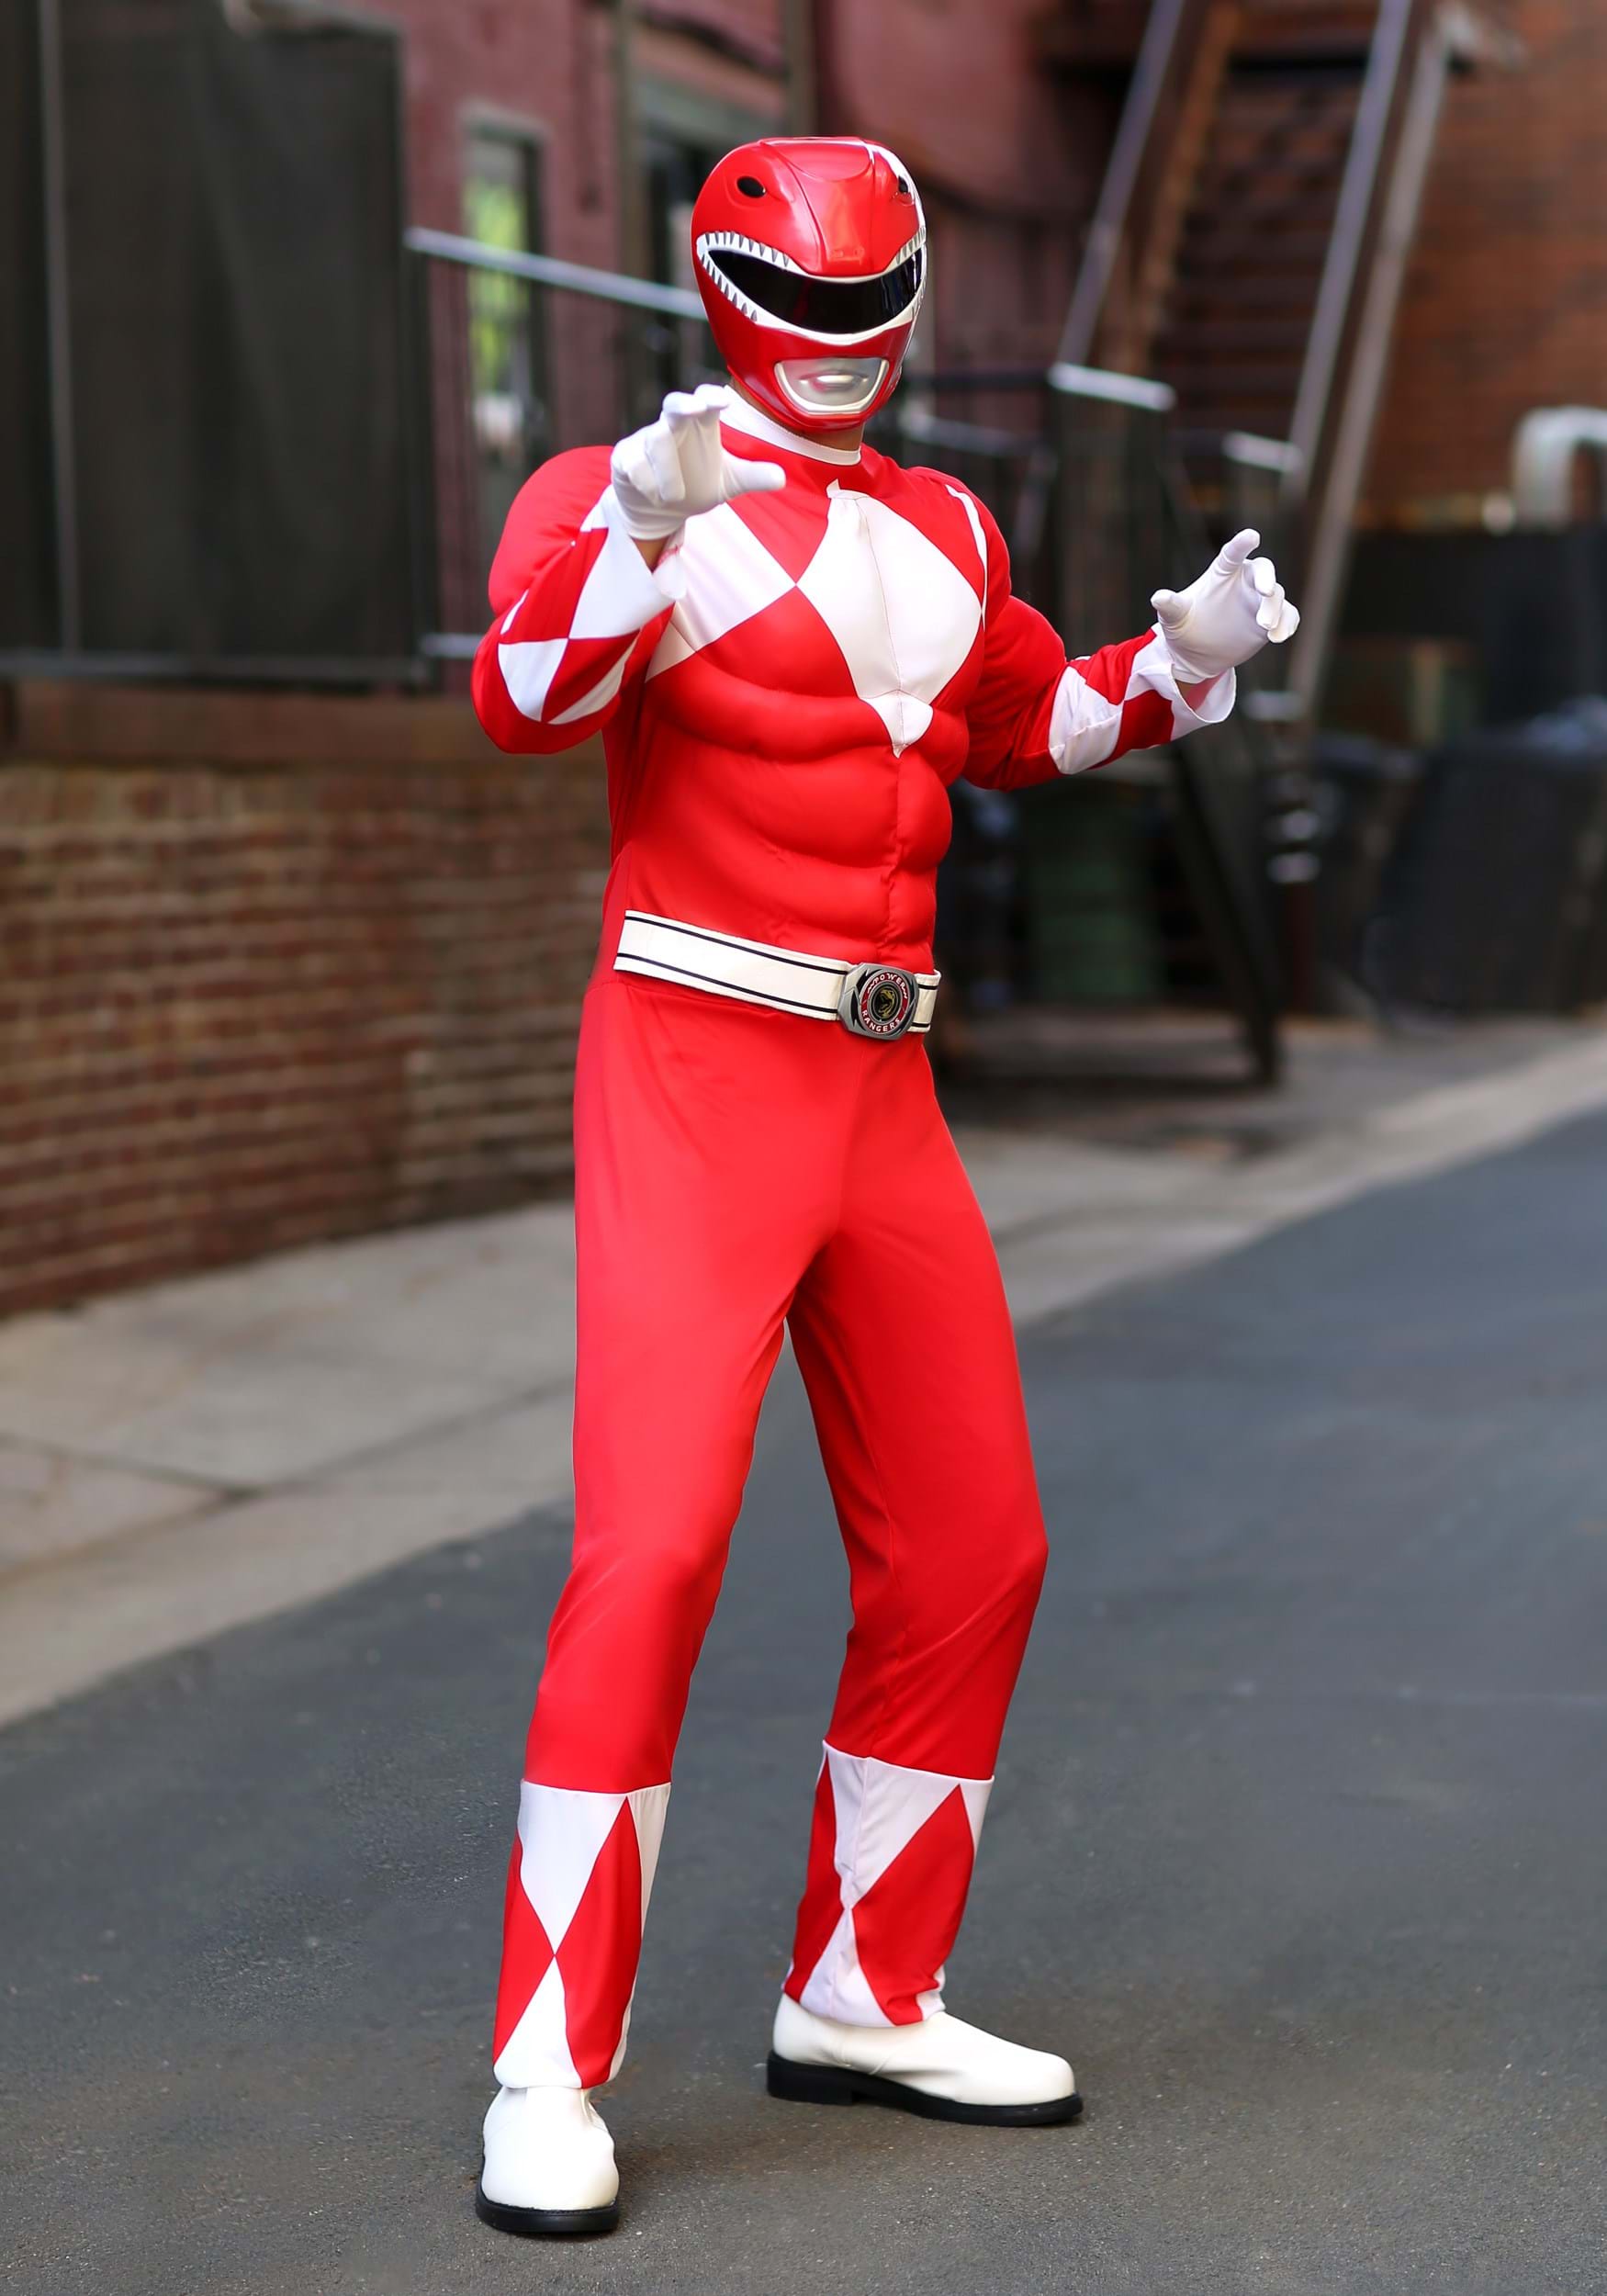 Power Rangers Adult Red Ranger Muscle Costume